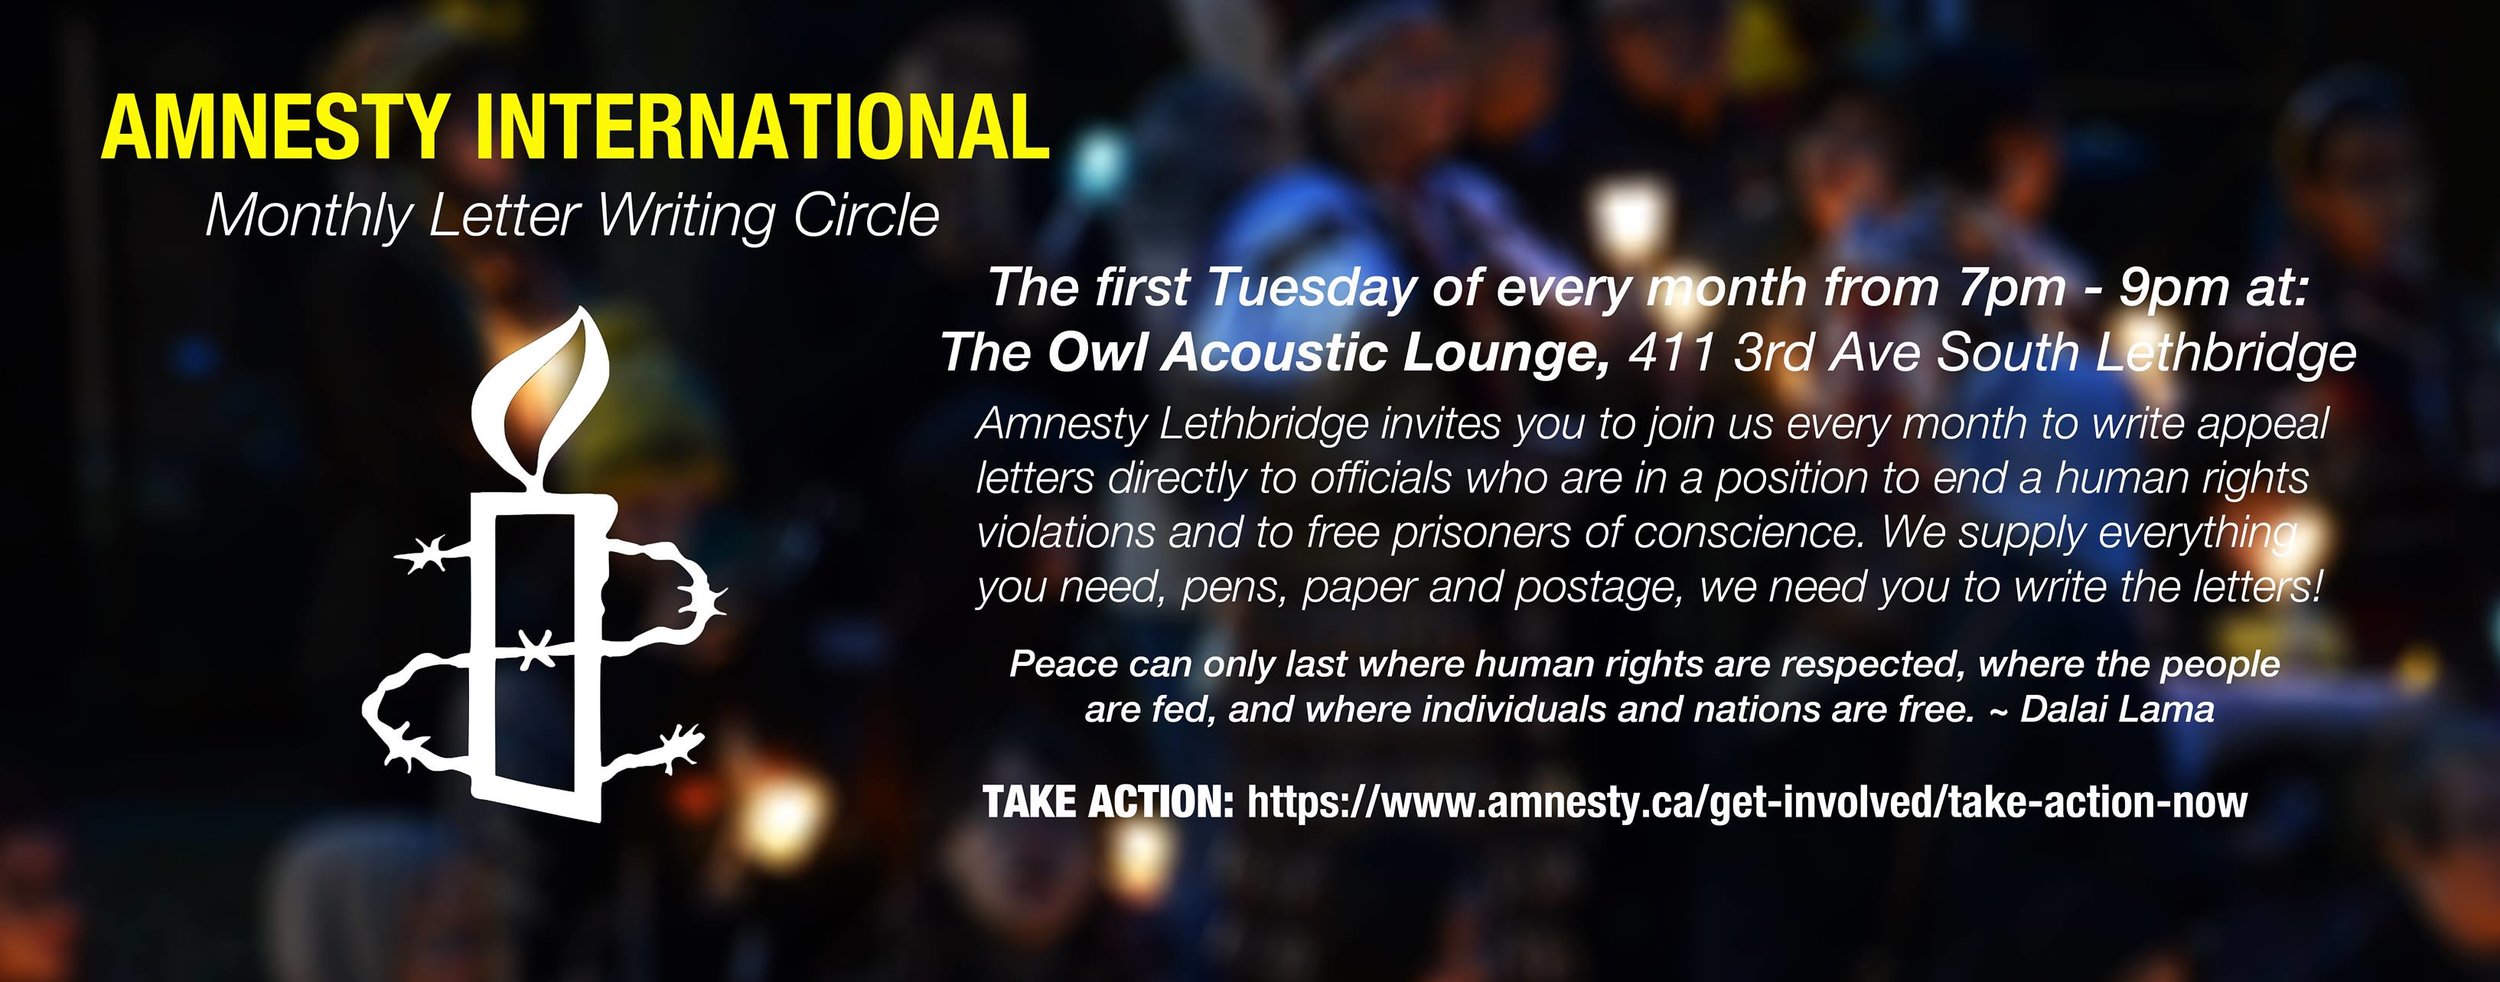 Web banner monthly letter writing circle at Owl Acoustic Lounge - 2018